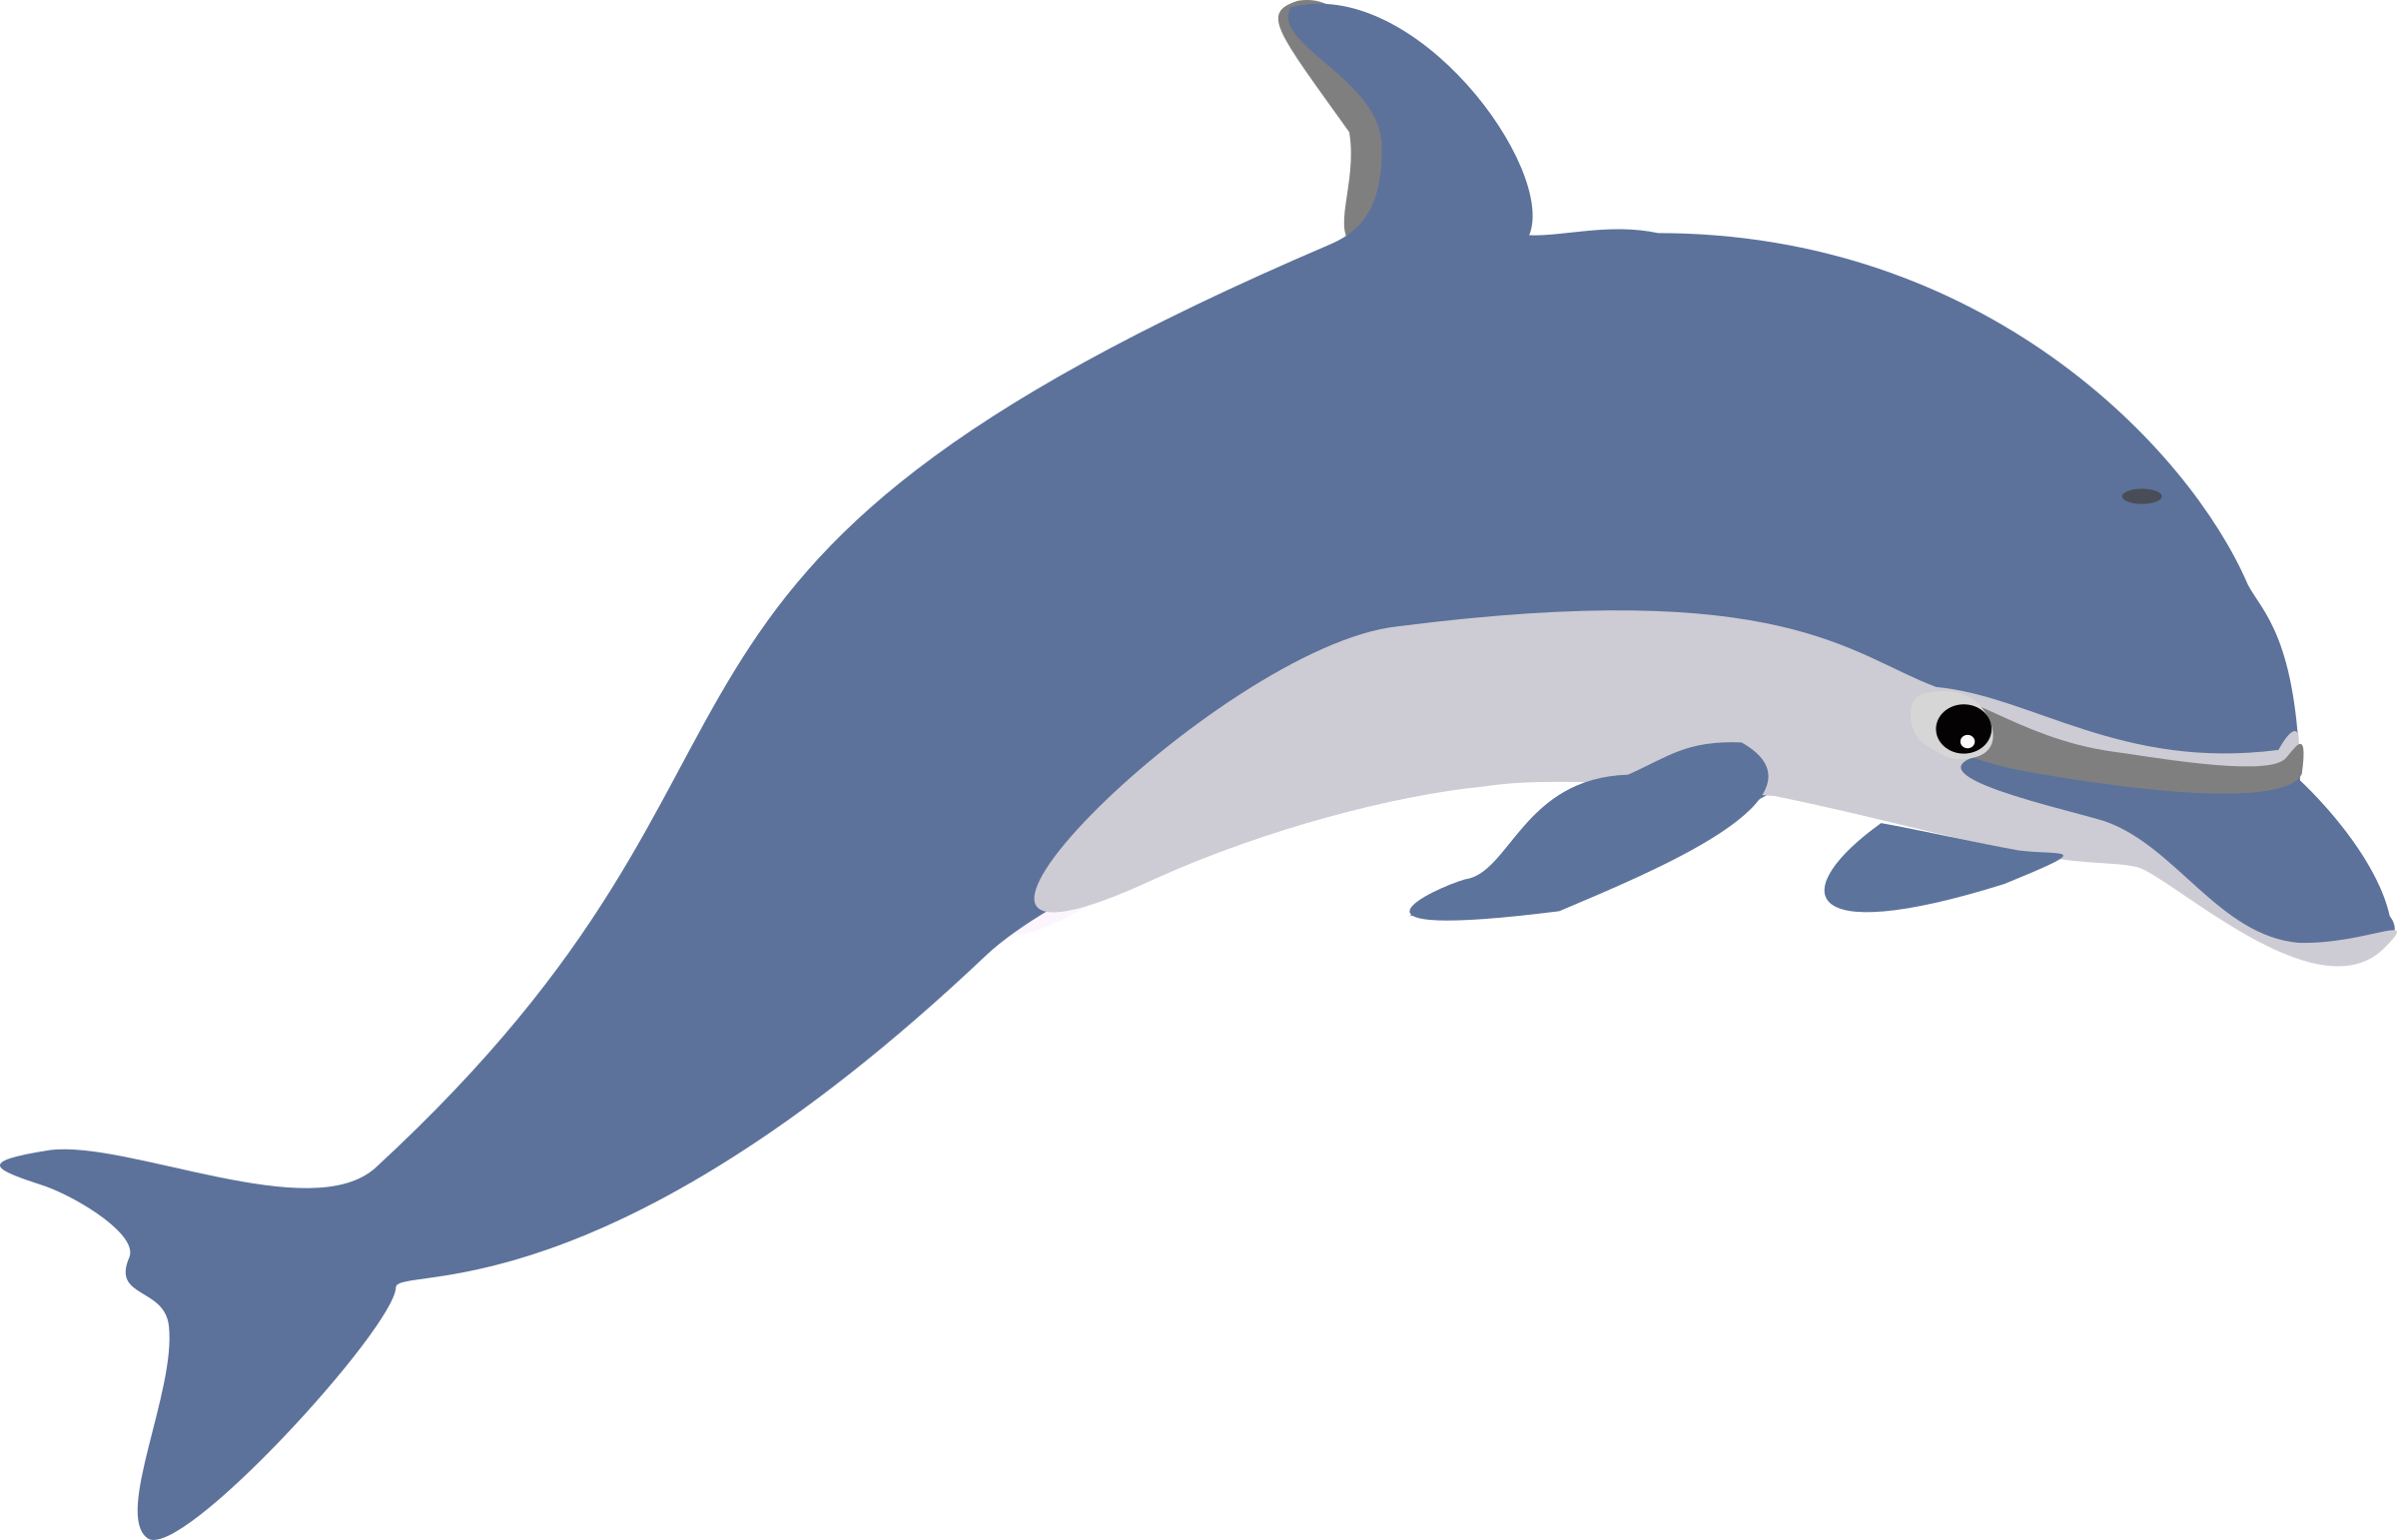 Another dolphin Clip arts